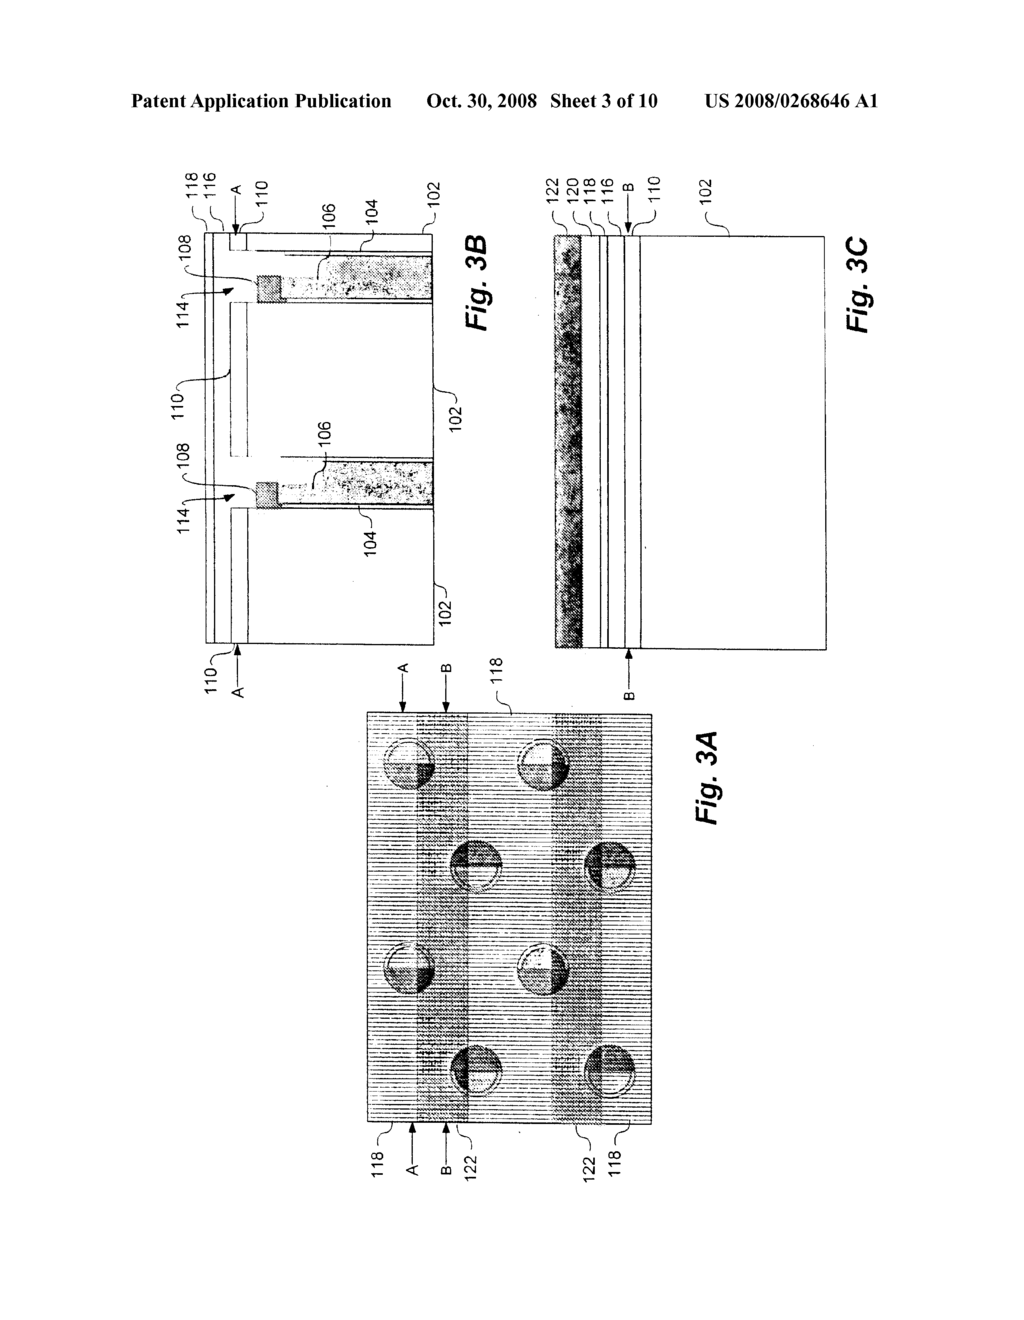 REDUCED AREA DYNAMIC RANDOM ACCESS MEMORY (DRAM) CELL AND METHOD FOR FABRICATING THE SAME - diagram, schematic, and image 04